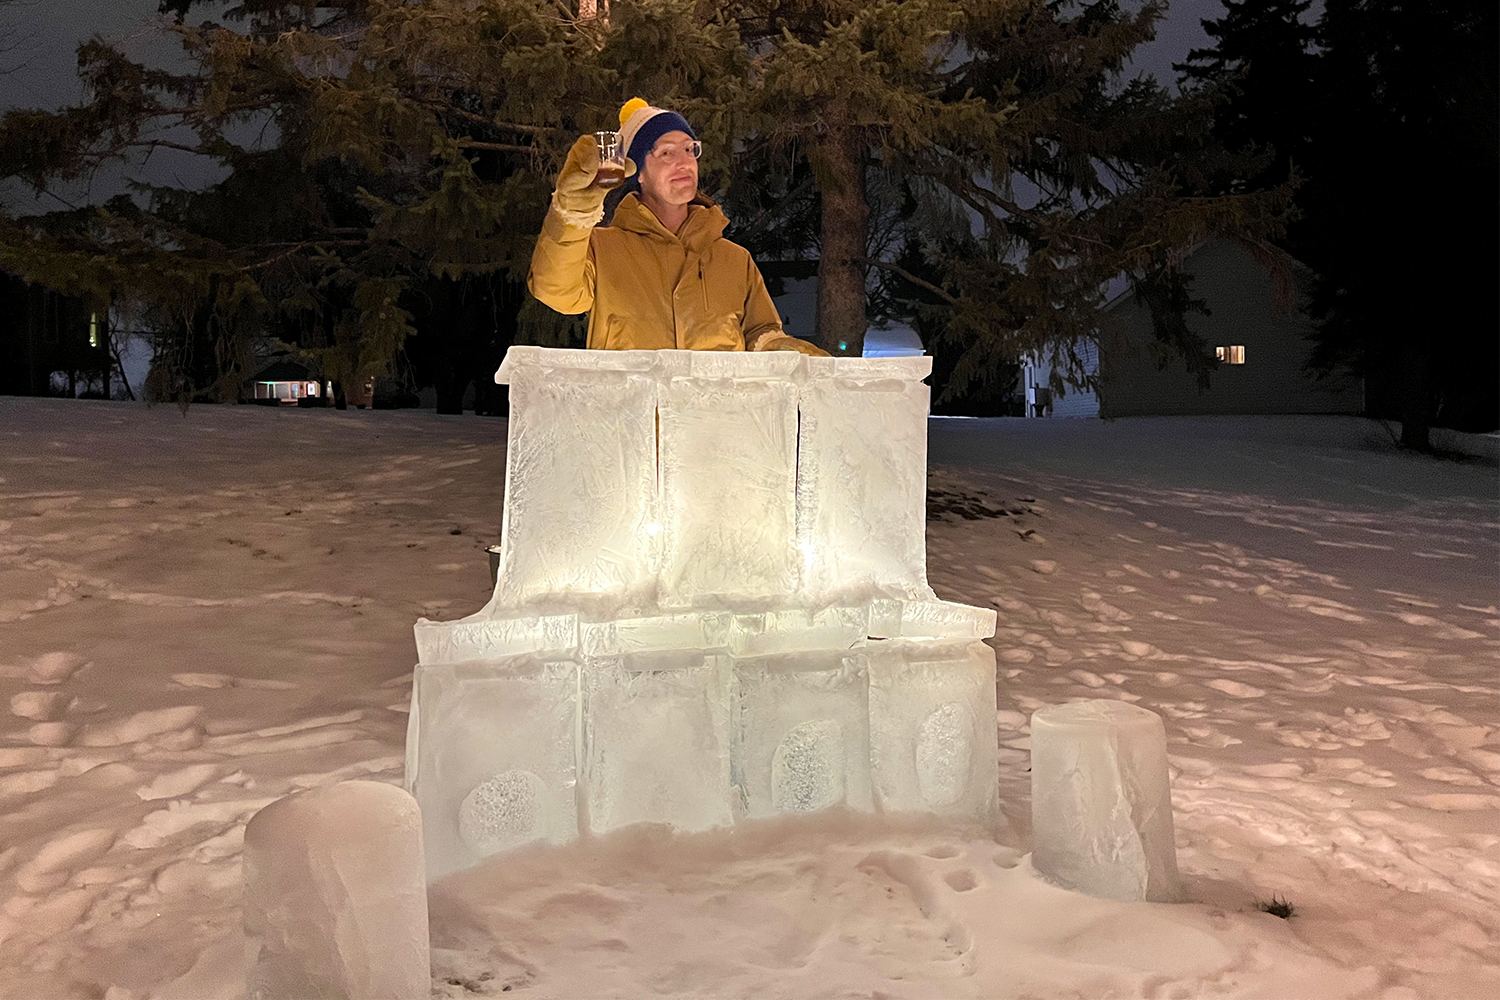 A man in a winter jacket, mittens and beanie holding up a cocktail from a homemade ice bar. In this article, we talk about how to build your own ice bar.